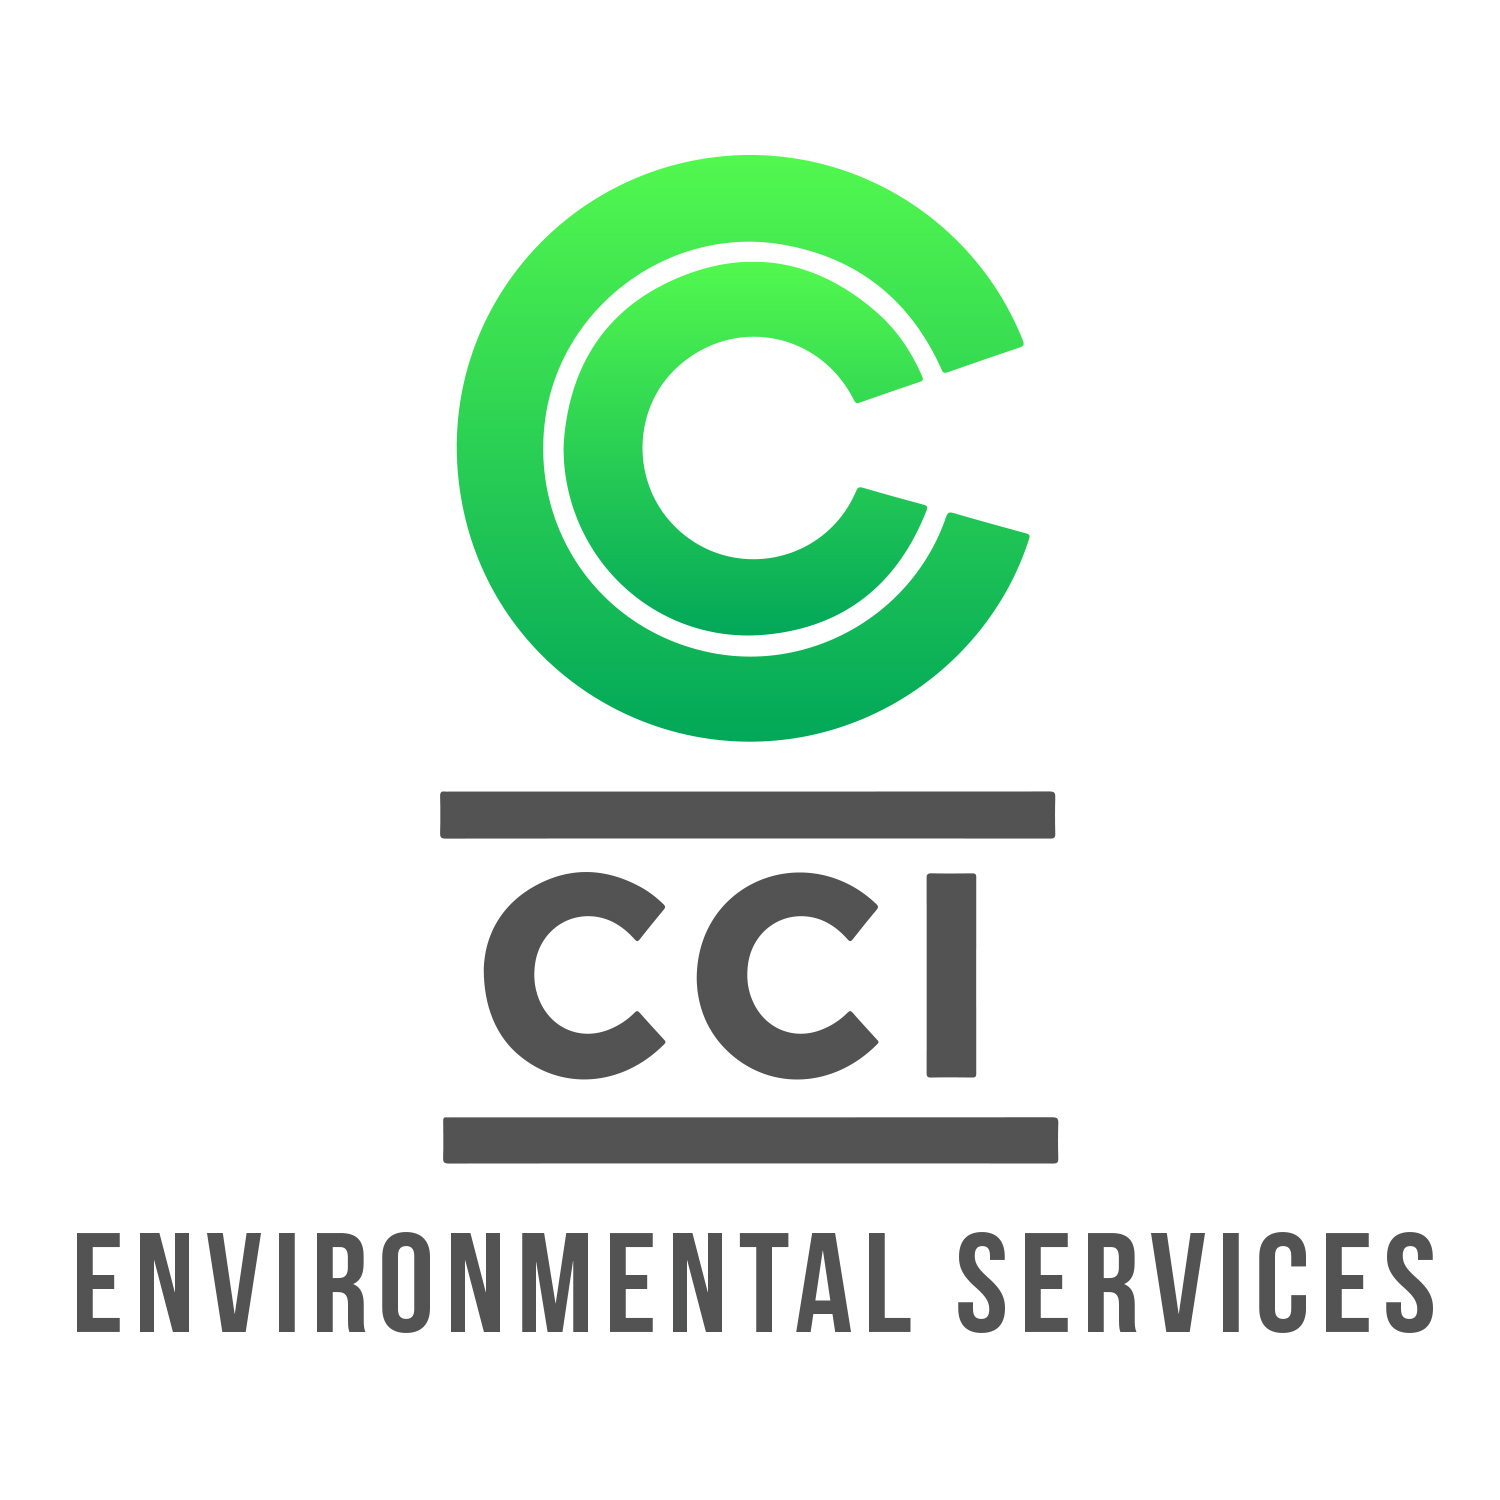 About CCI - CLEAN COMBUSTION, INC.